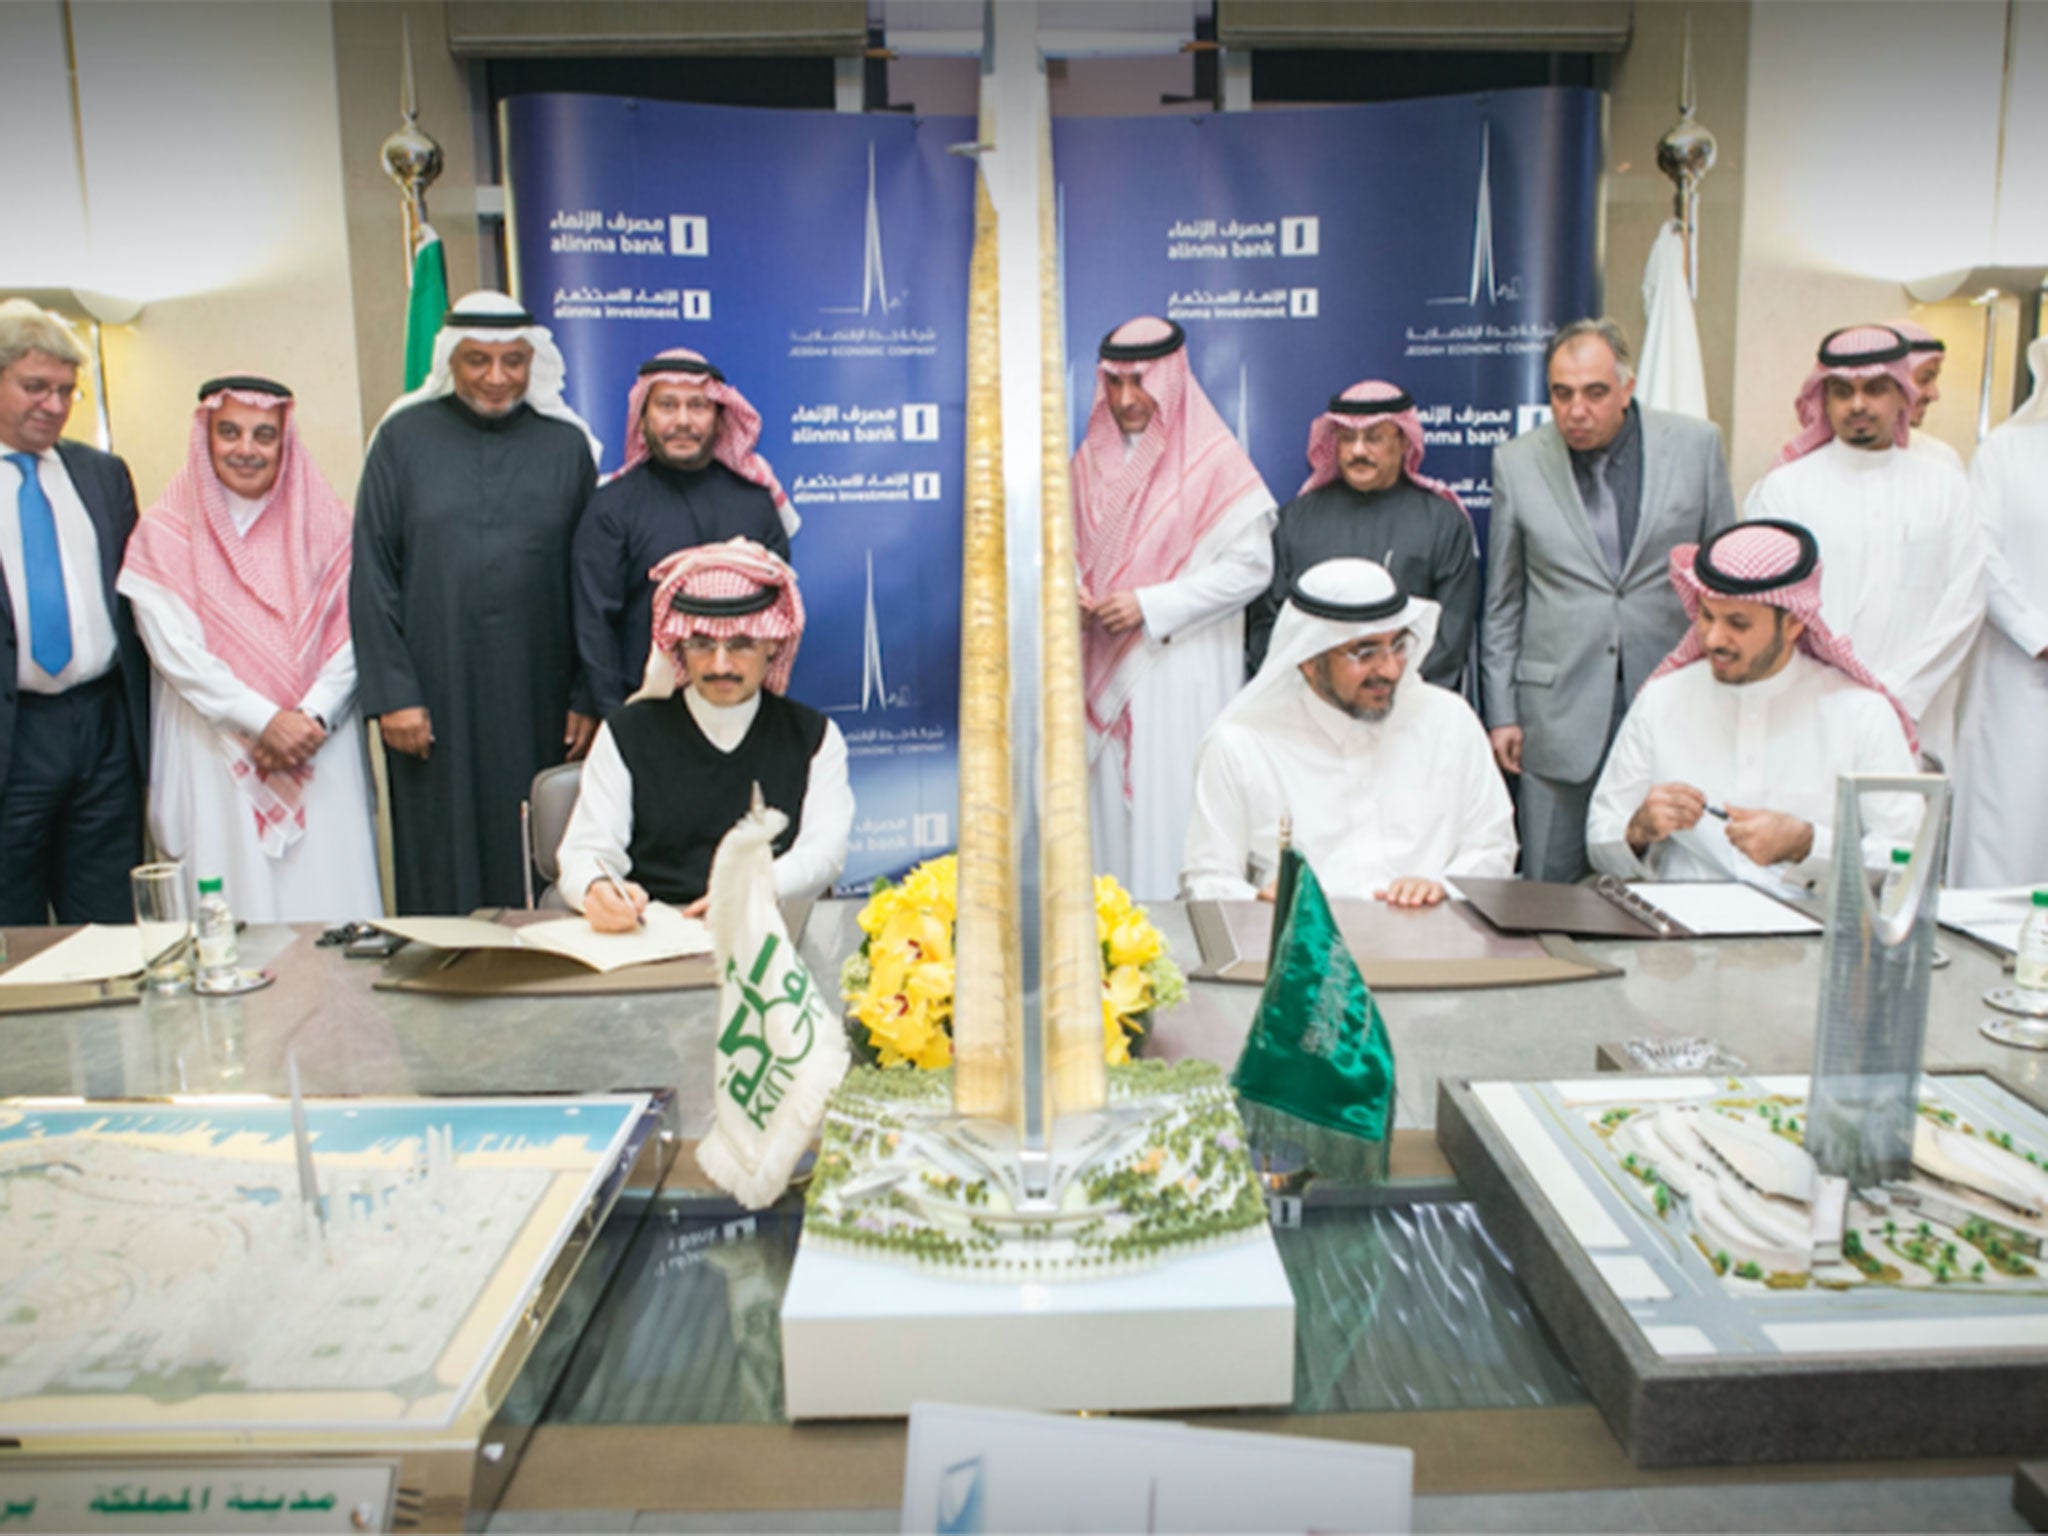 Jeddah Economic Company and Saudi Arabia’s Alinma Investment have signed a deal to initiate SAR8.4 billion fund to finish the Jeddah Tower